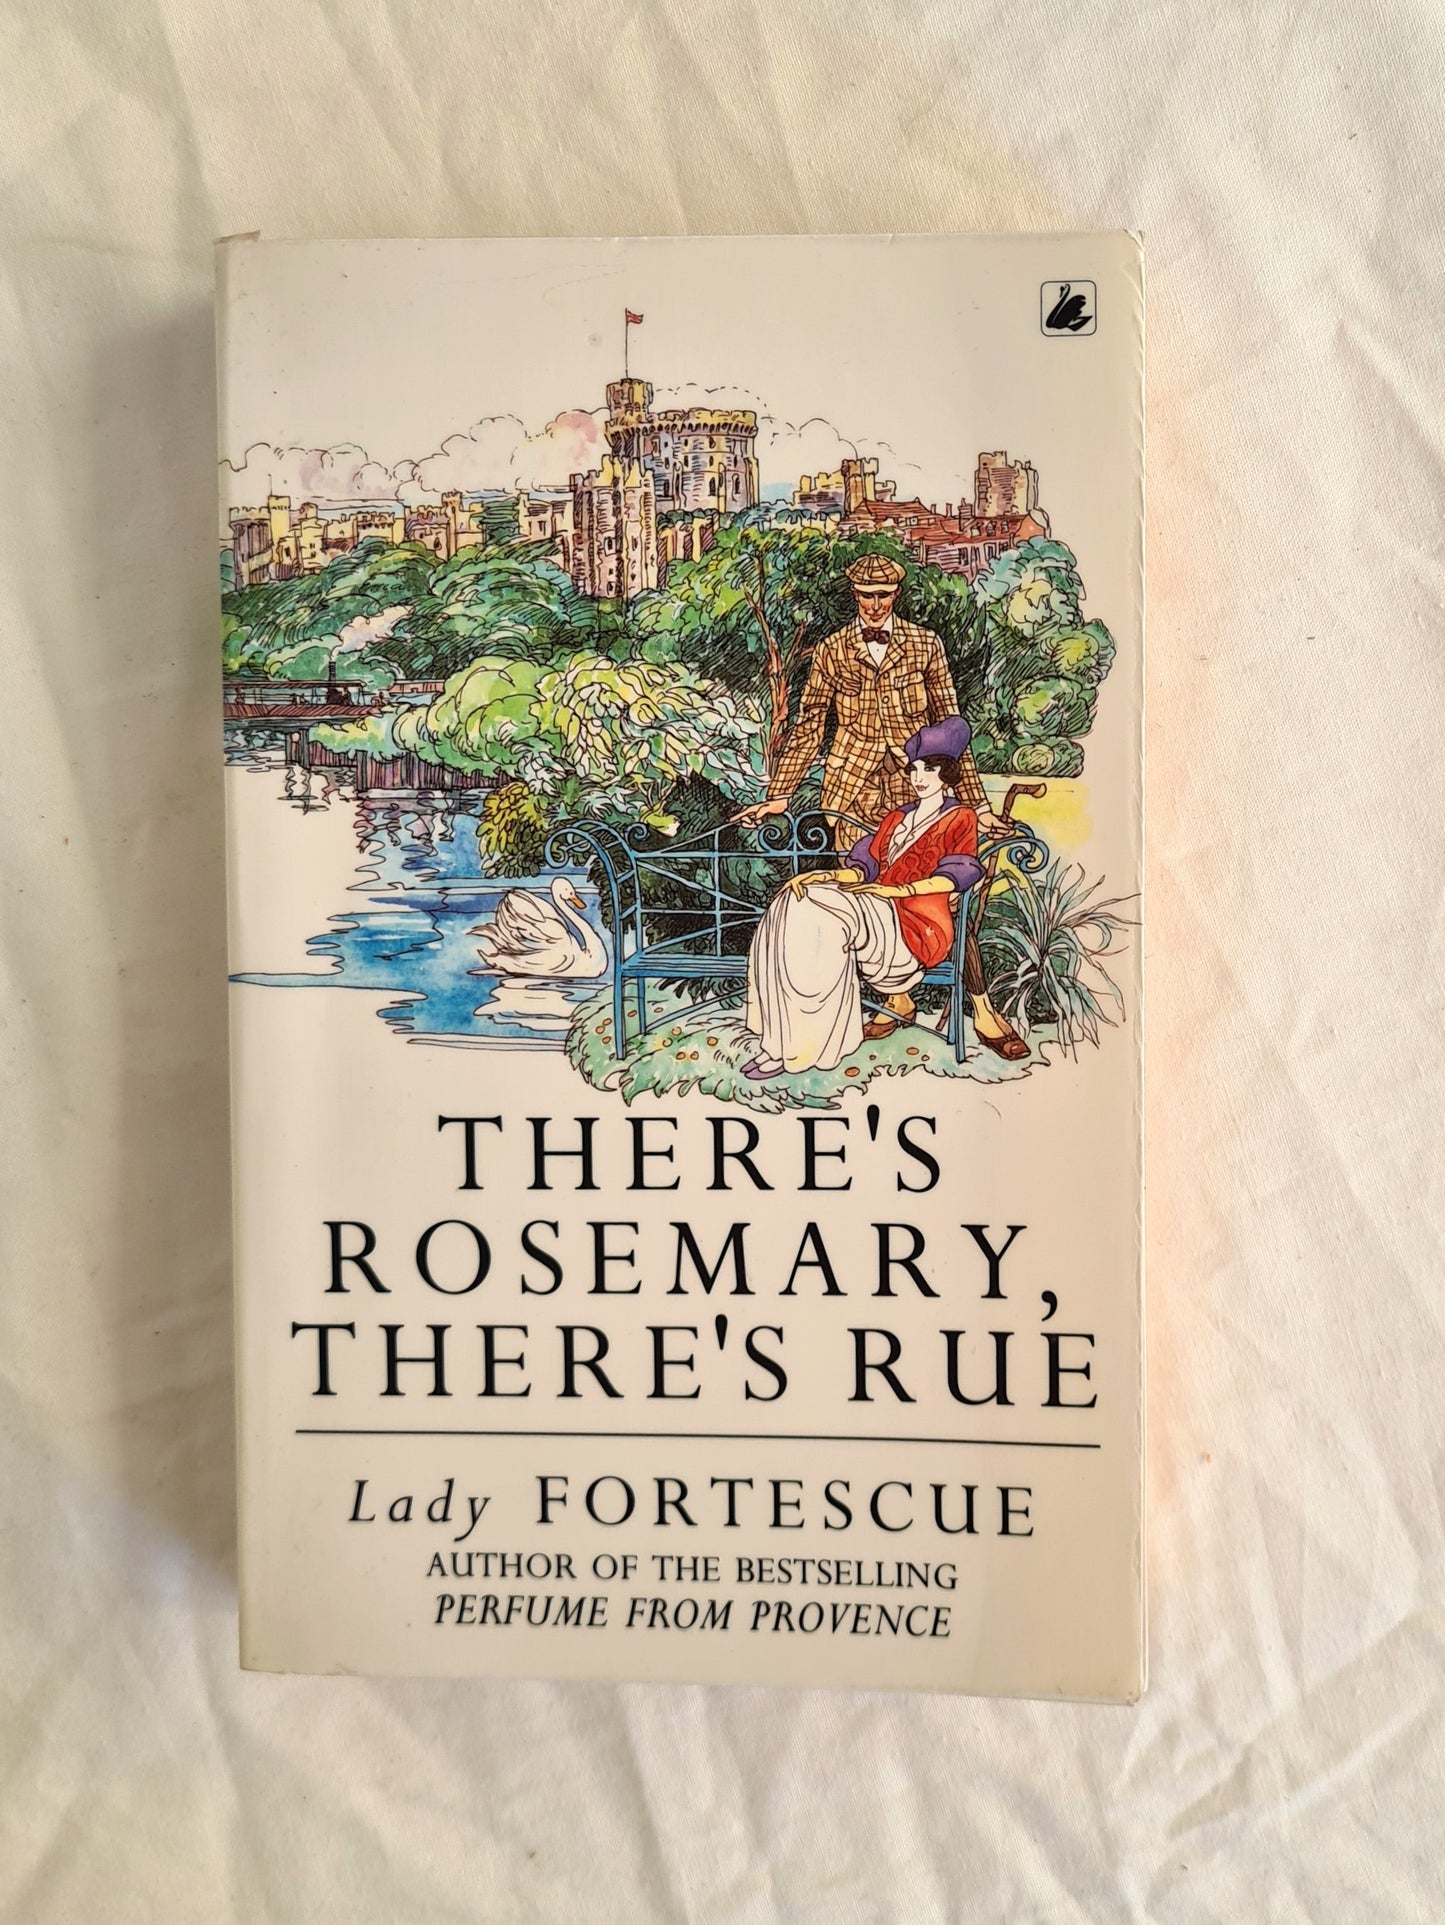 There’s Rosemary, There’s Rue by Lady Fortescue